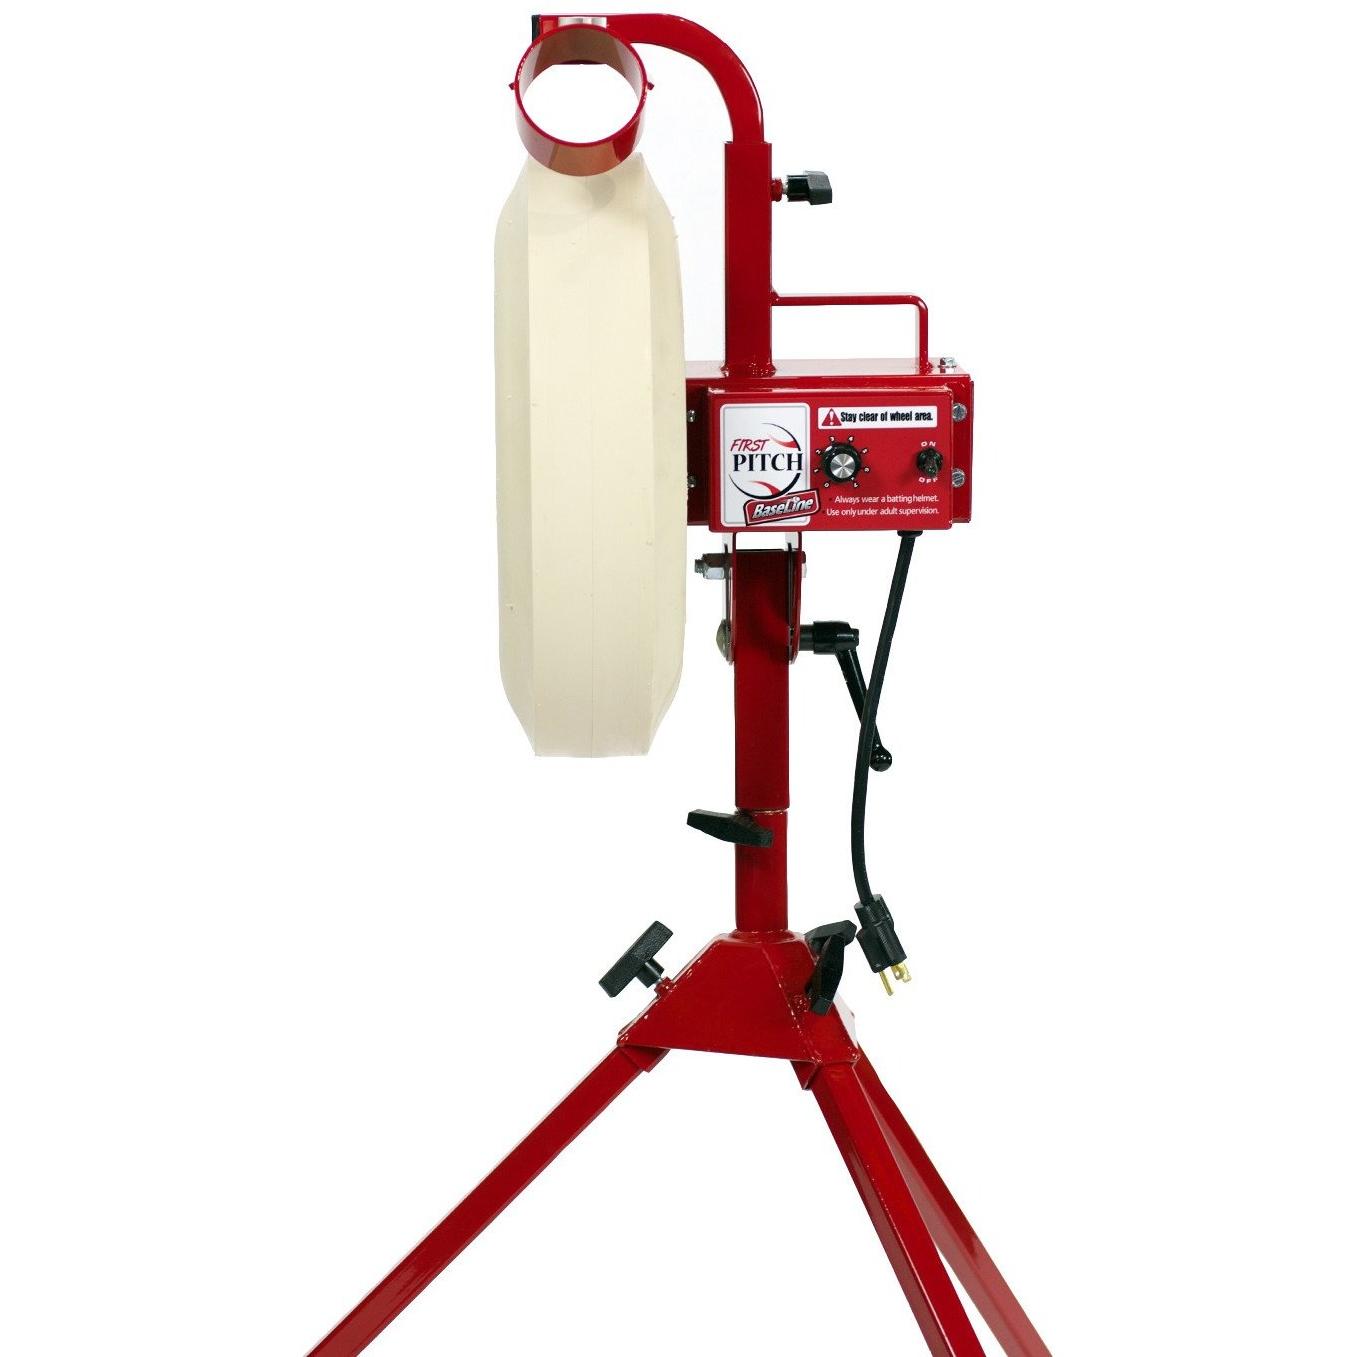 First Pitch Baseline Pitching Machine For Baseball and Softball Left Side View